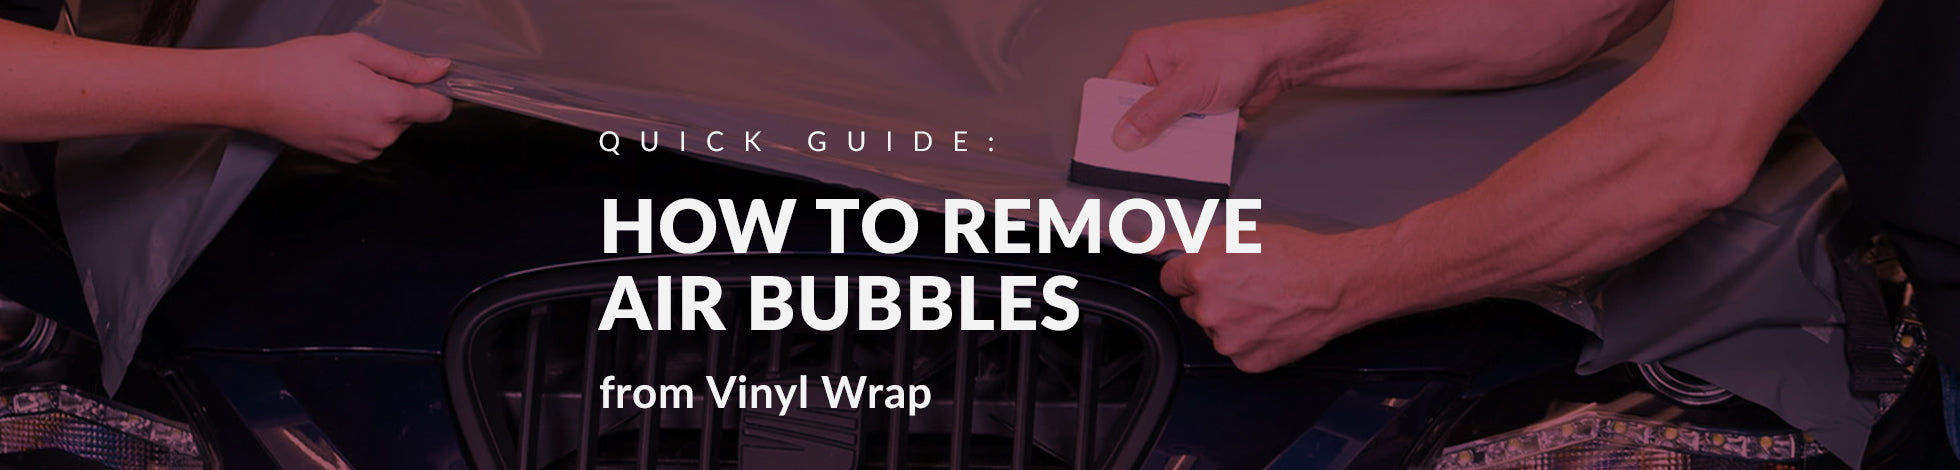 Quick Guide on How to Remove Air Bubbles from Vinyl Wrap